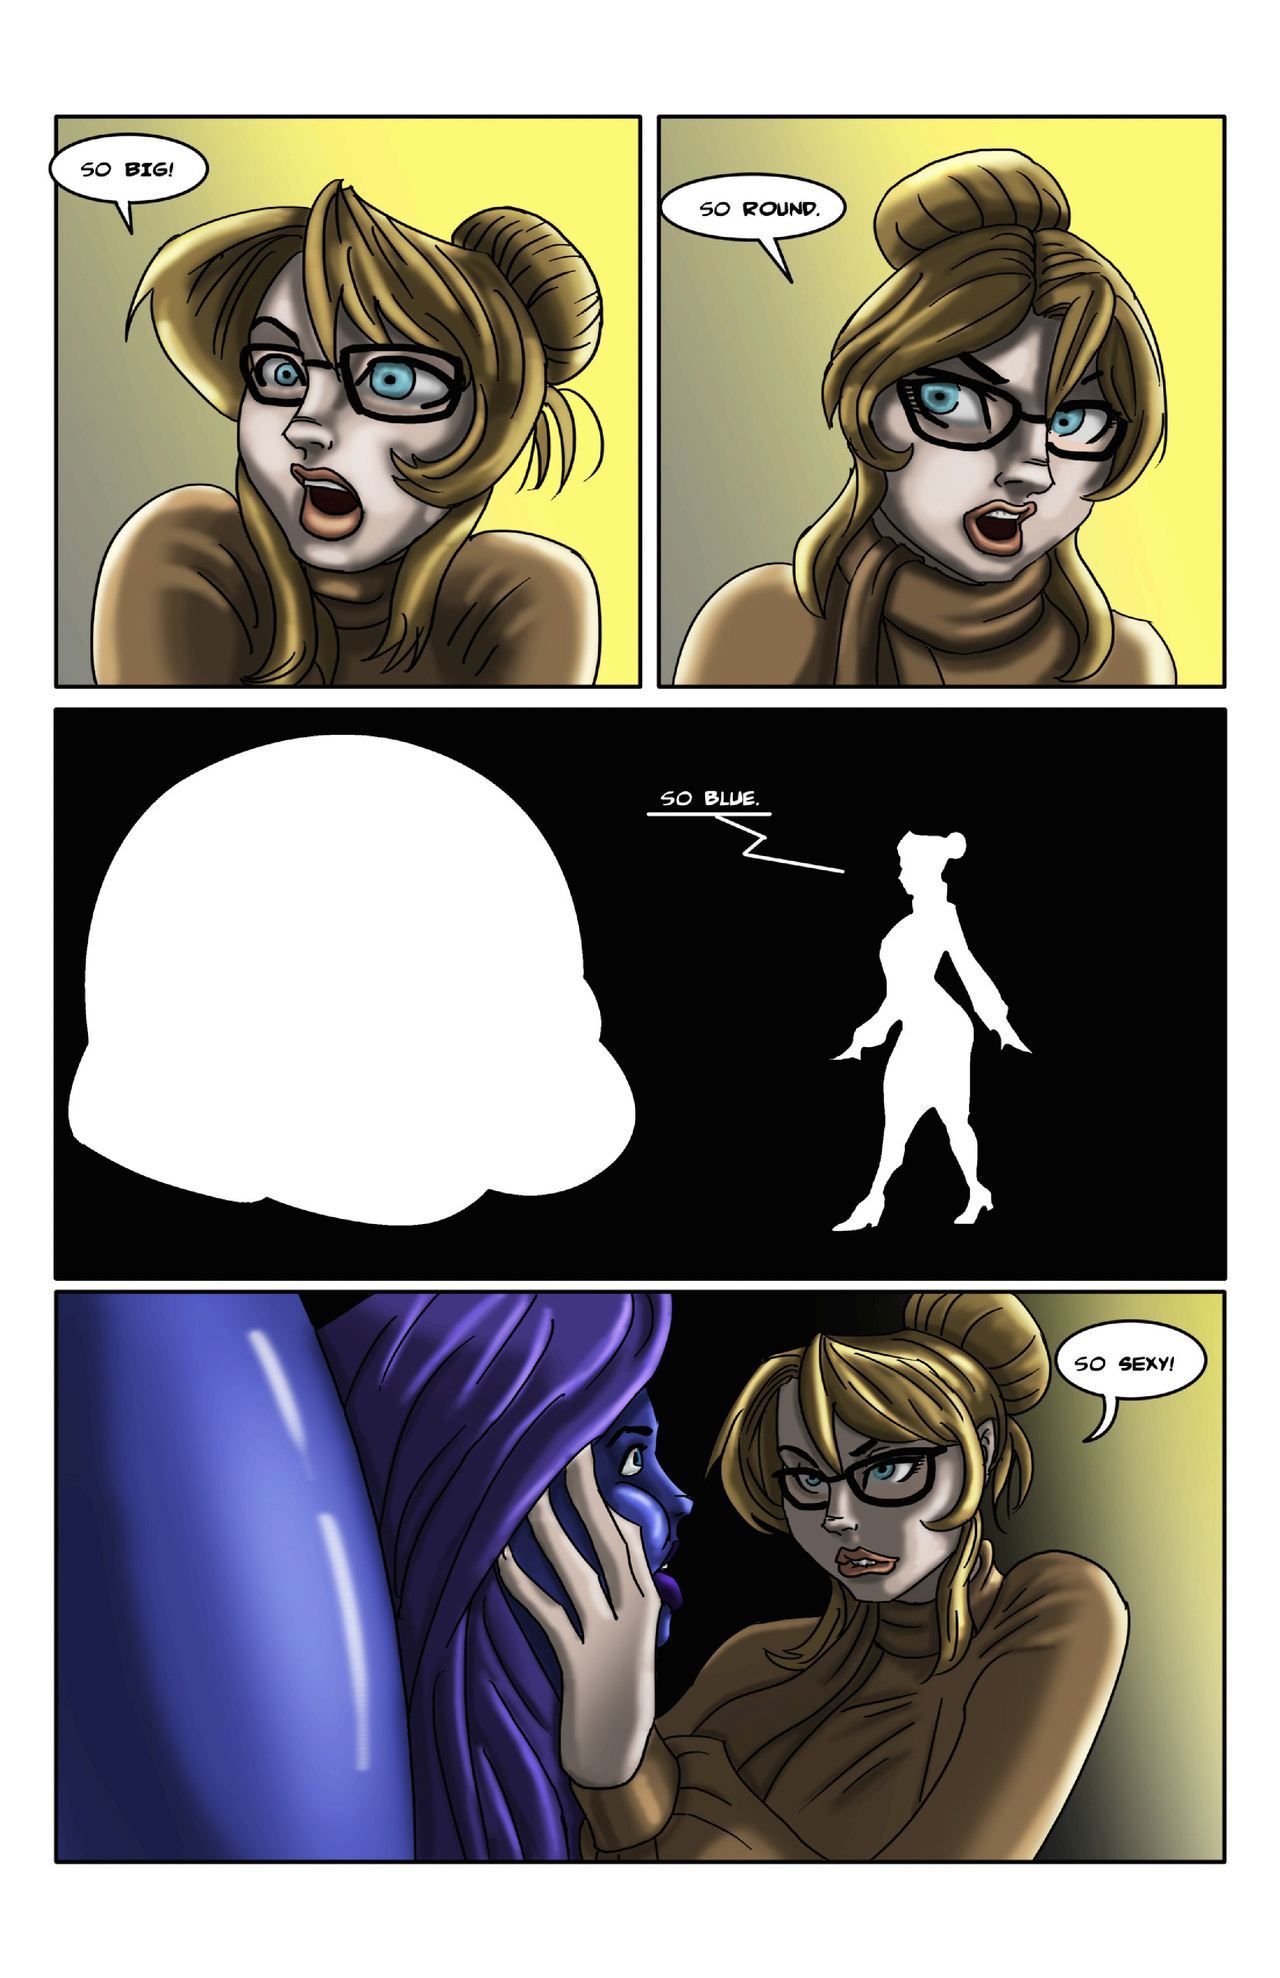 Blueberry Vengeance by LordAltros page 16